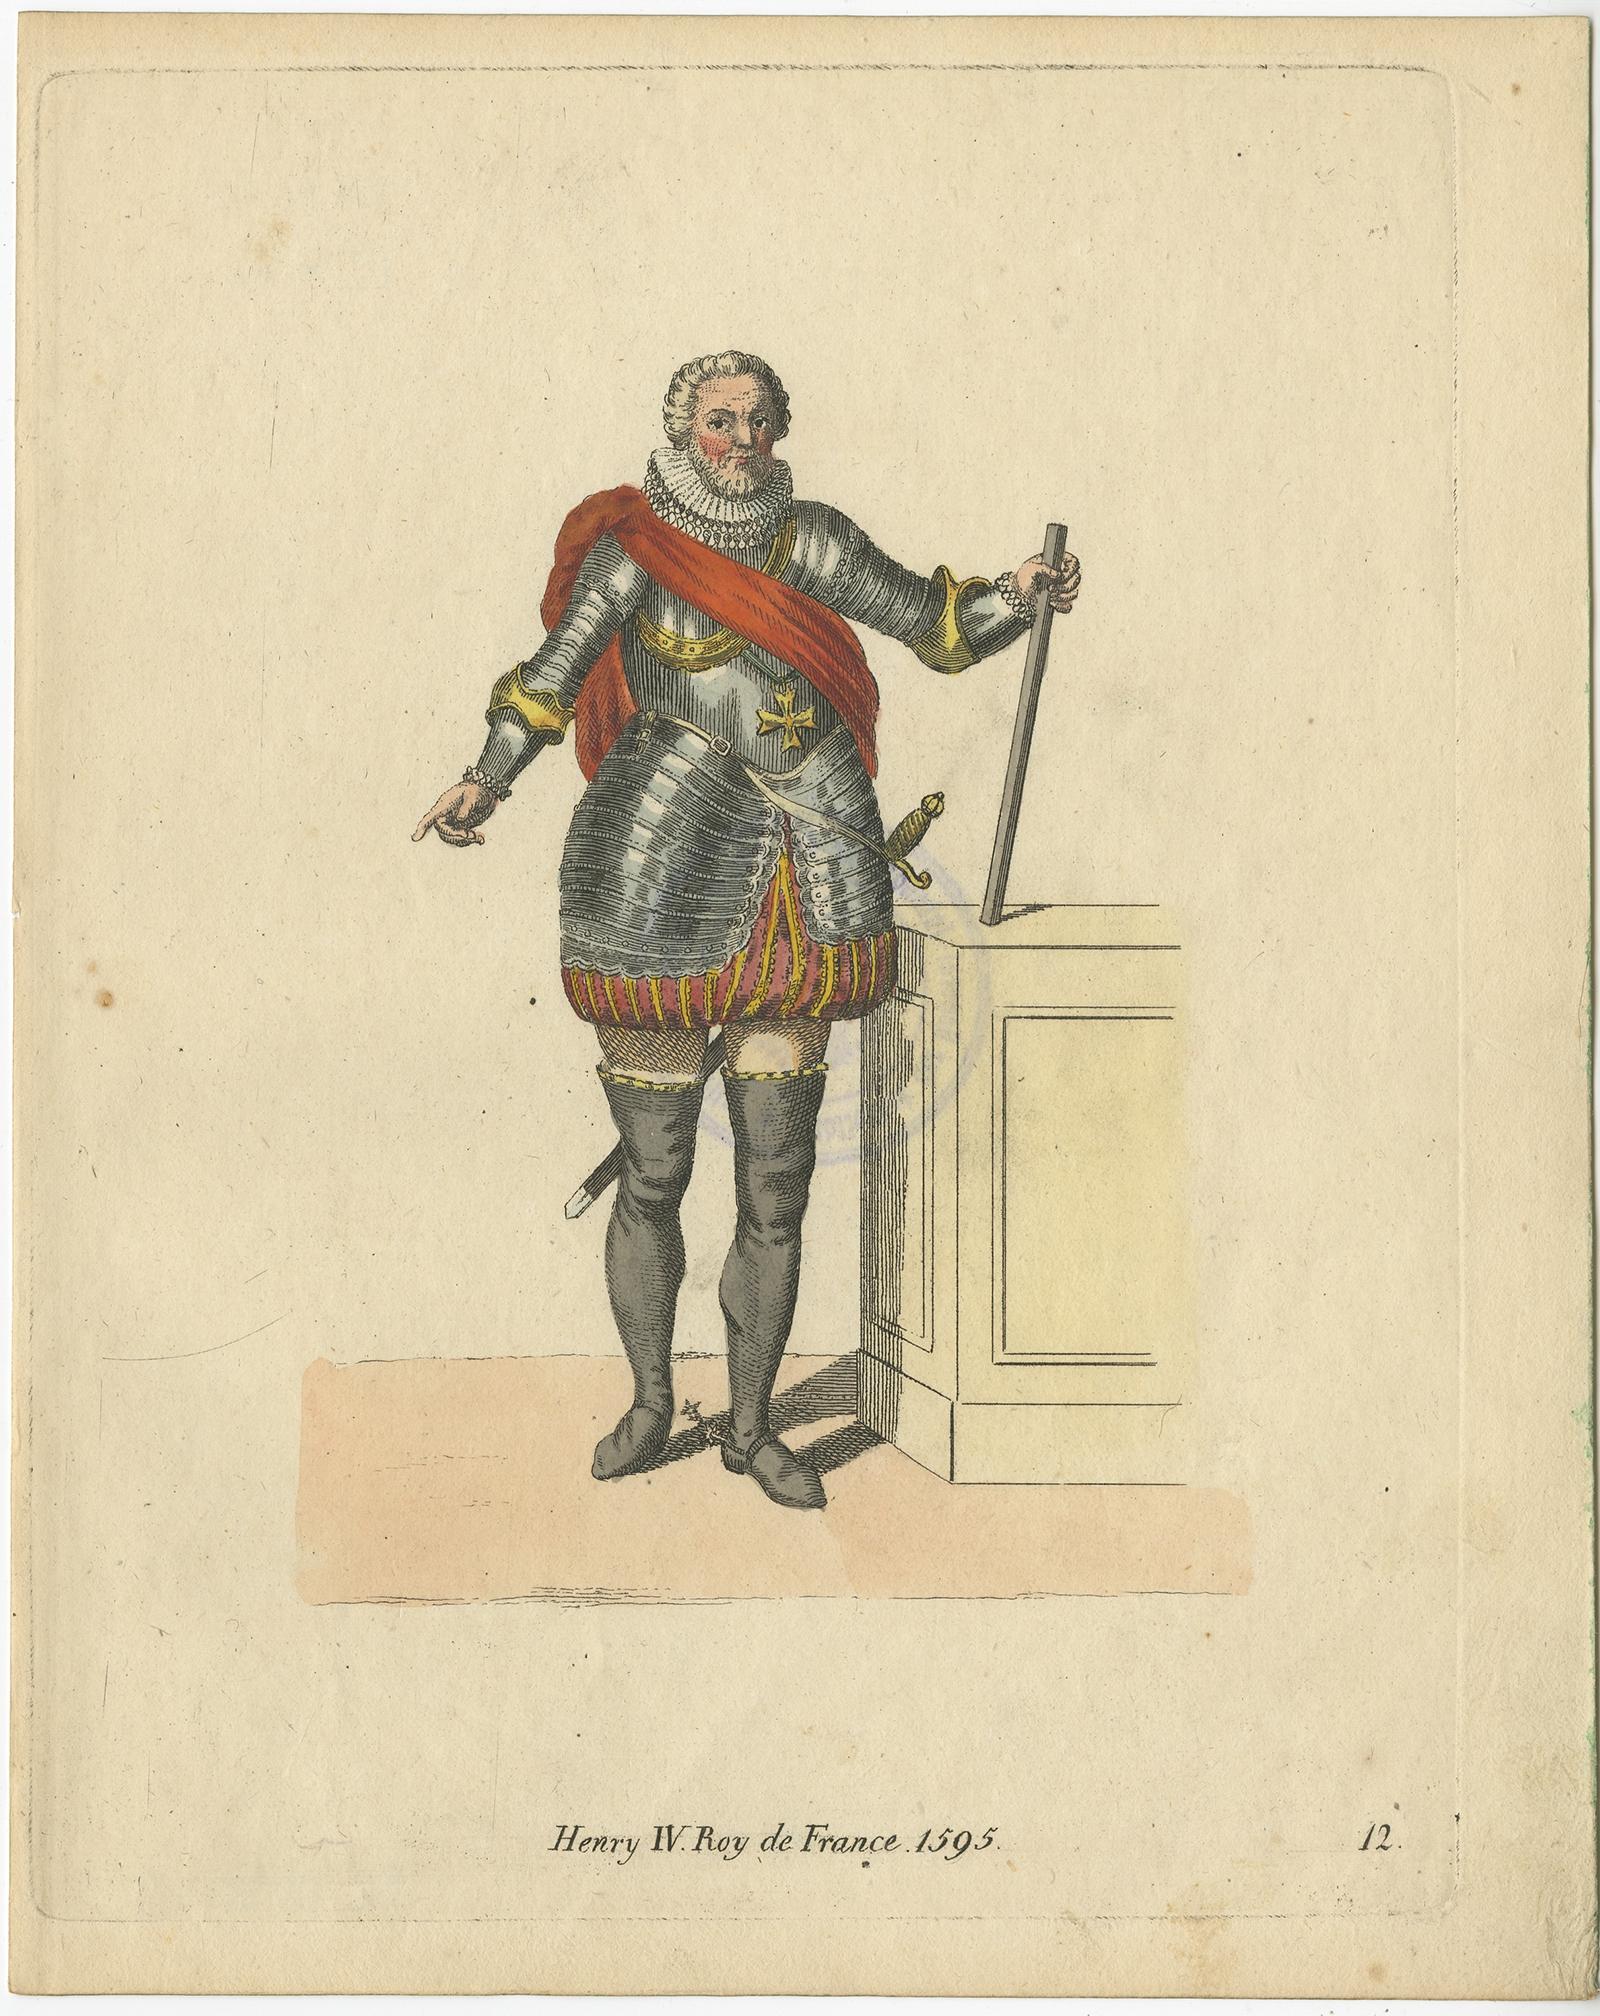 Antique costume print titled 'Henry IV Roy de France 1595'. 

This print depicts Henry IV, also known by the epithet Good King Henry or Henry the Great. He was King of Navarre (as Henry III) from 1572 and King of France from 1589 to 1610.